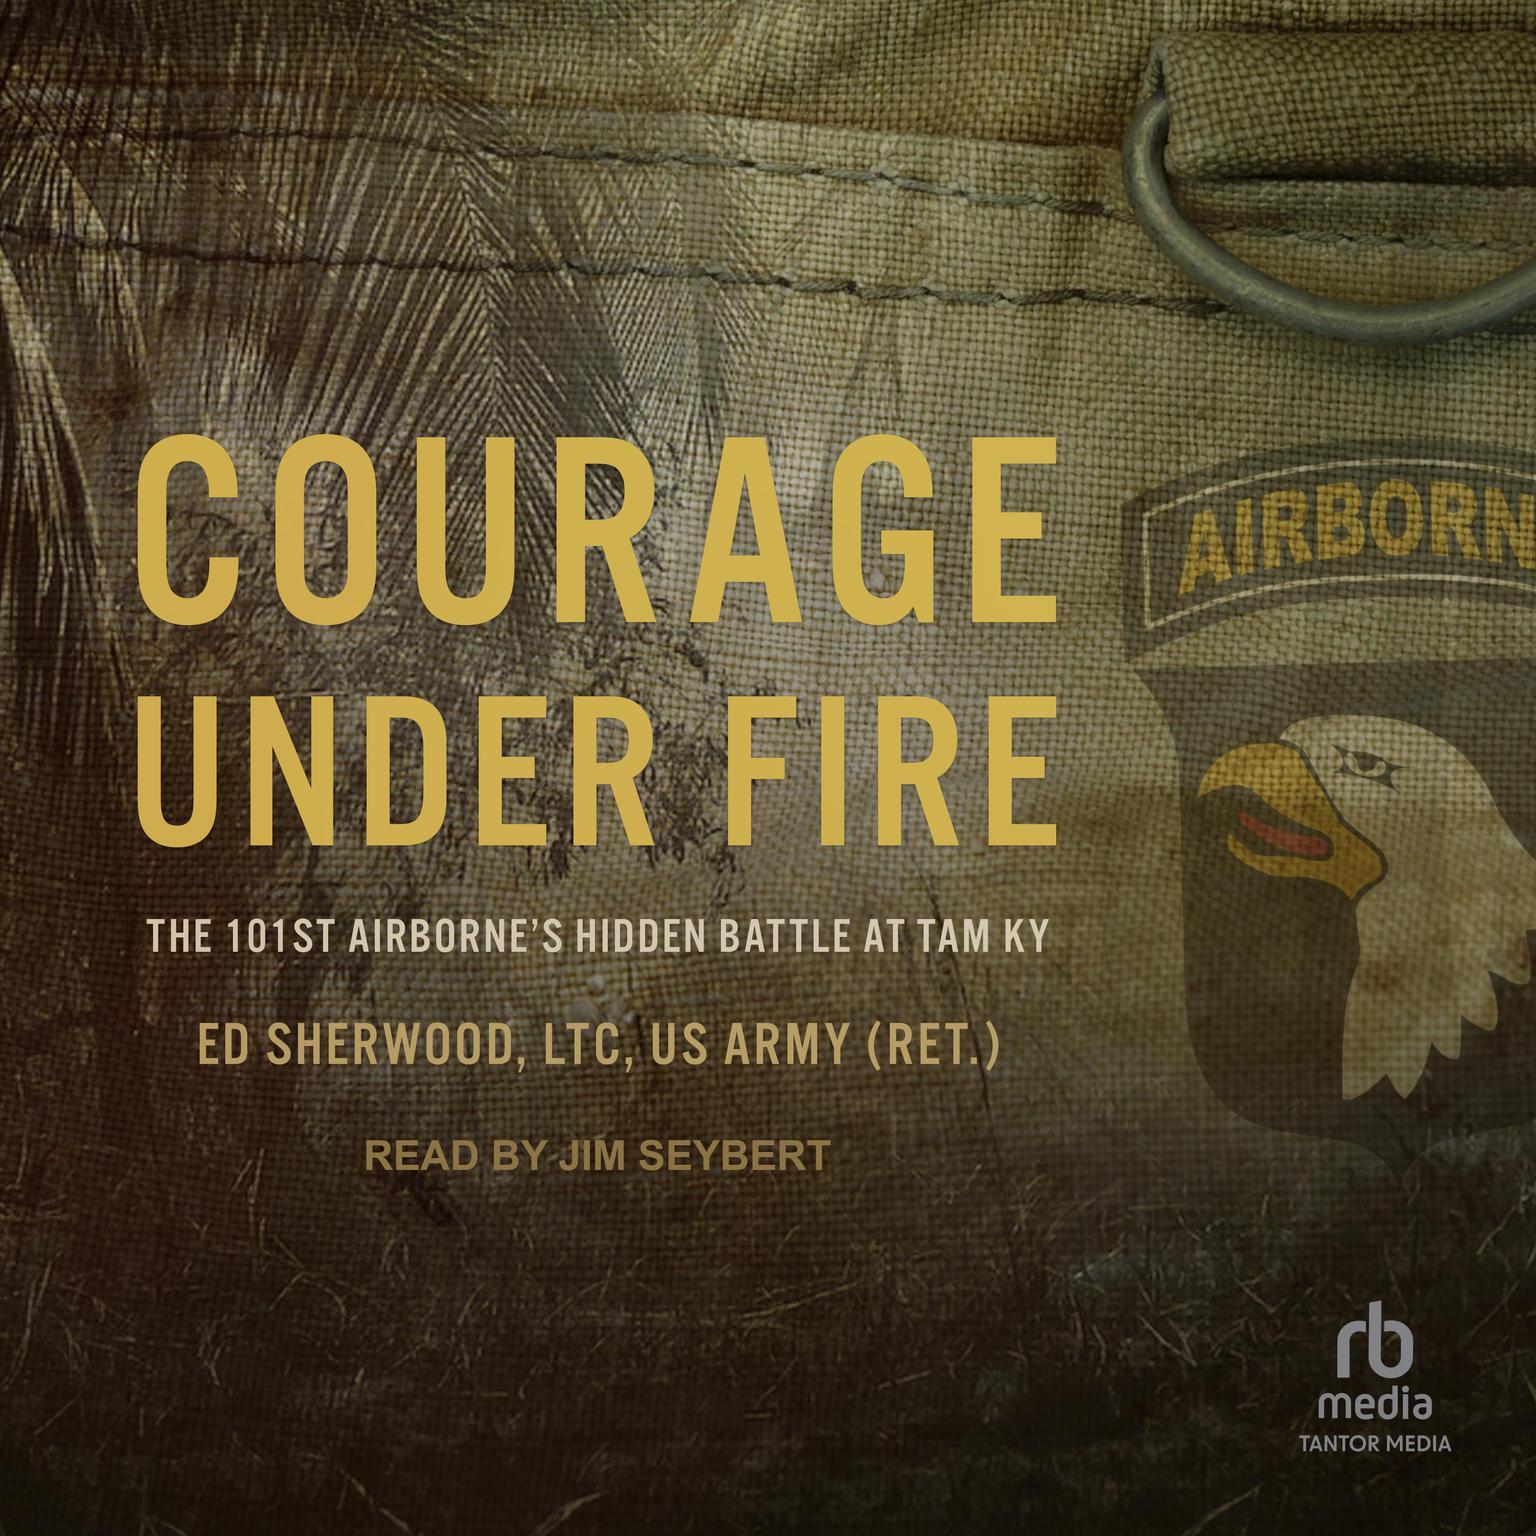 Courage Under Fire: The 101st Airbornes Hidden Battle at Tam Ky Audiobook, by Ed Sherwood, US Army